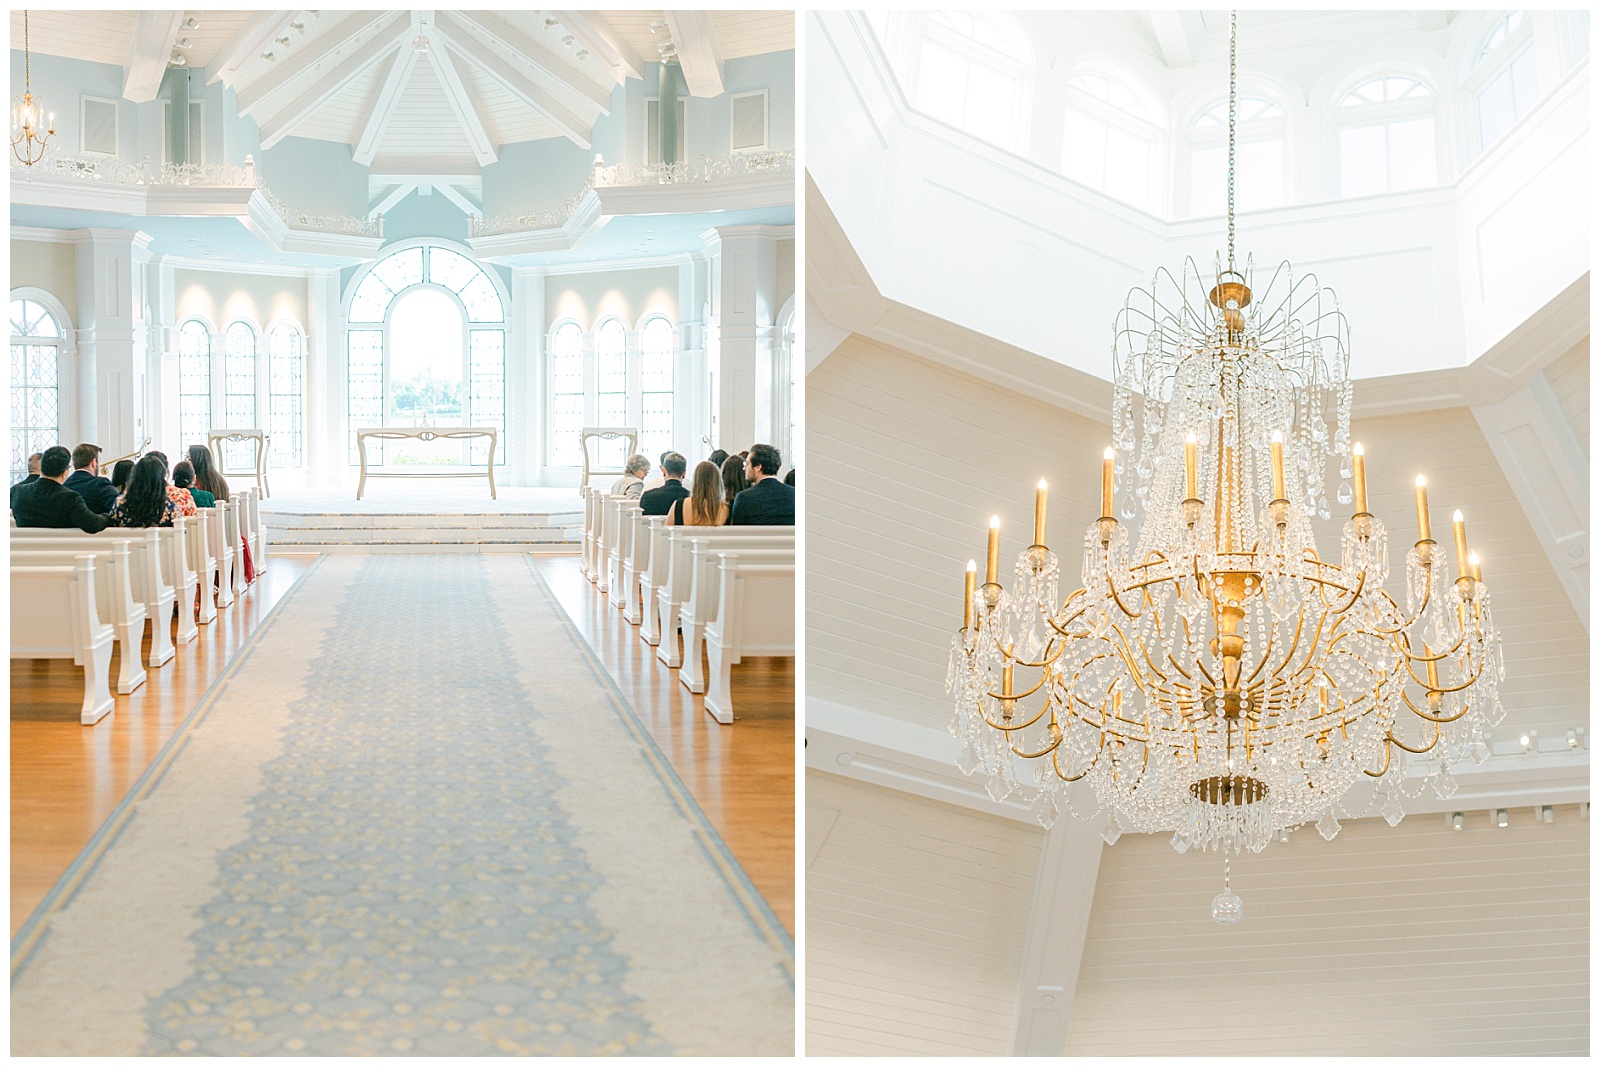 Left: Wedding guests waiting for ceremony to begin
Right: Detail photo of chandelier hanging in the middle of the wedding pavilion
By Elizabeth Kane Photography in Orlando Florida